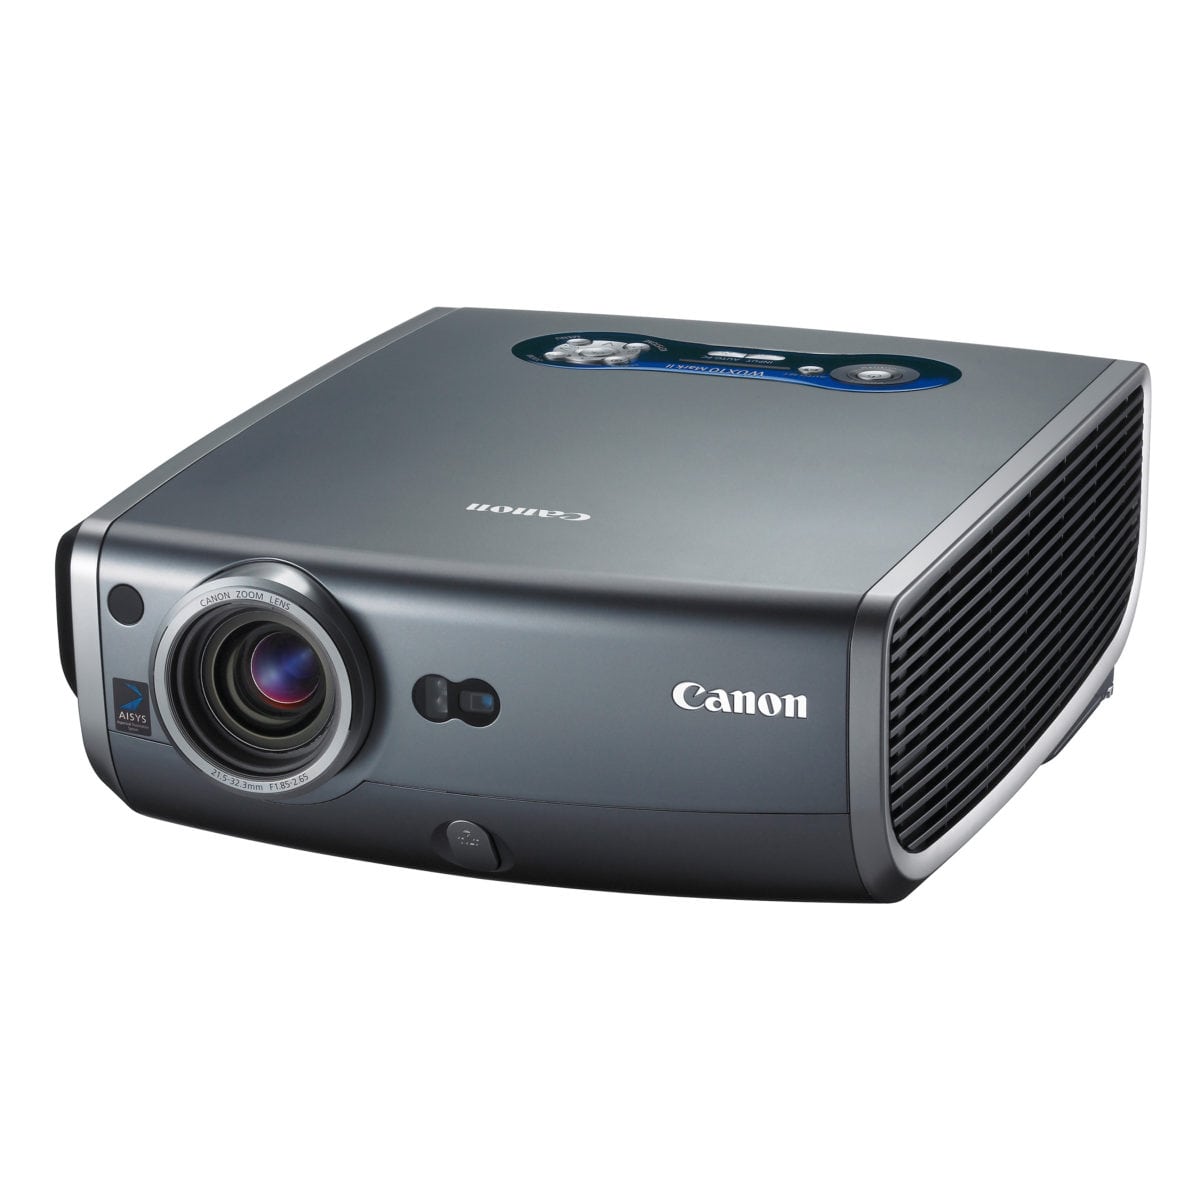 Canon REALiS WUX10 Projector Review – Overview